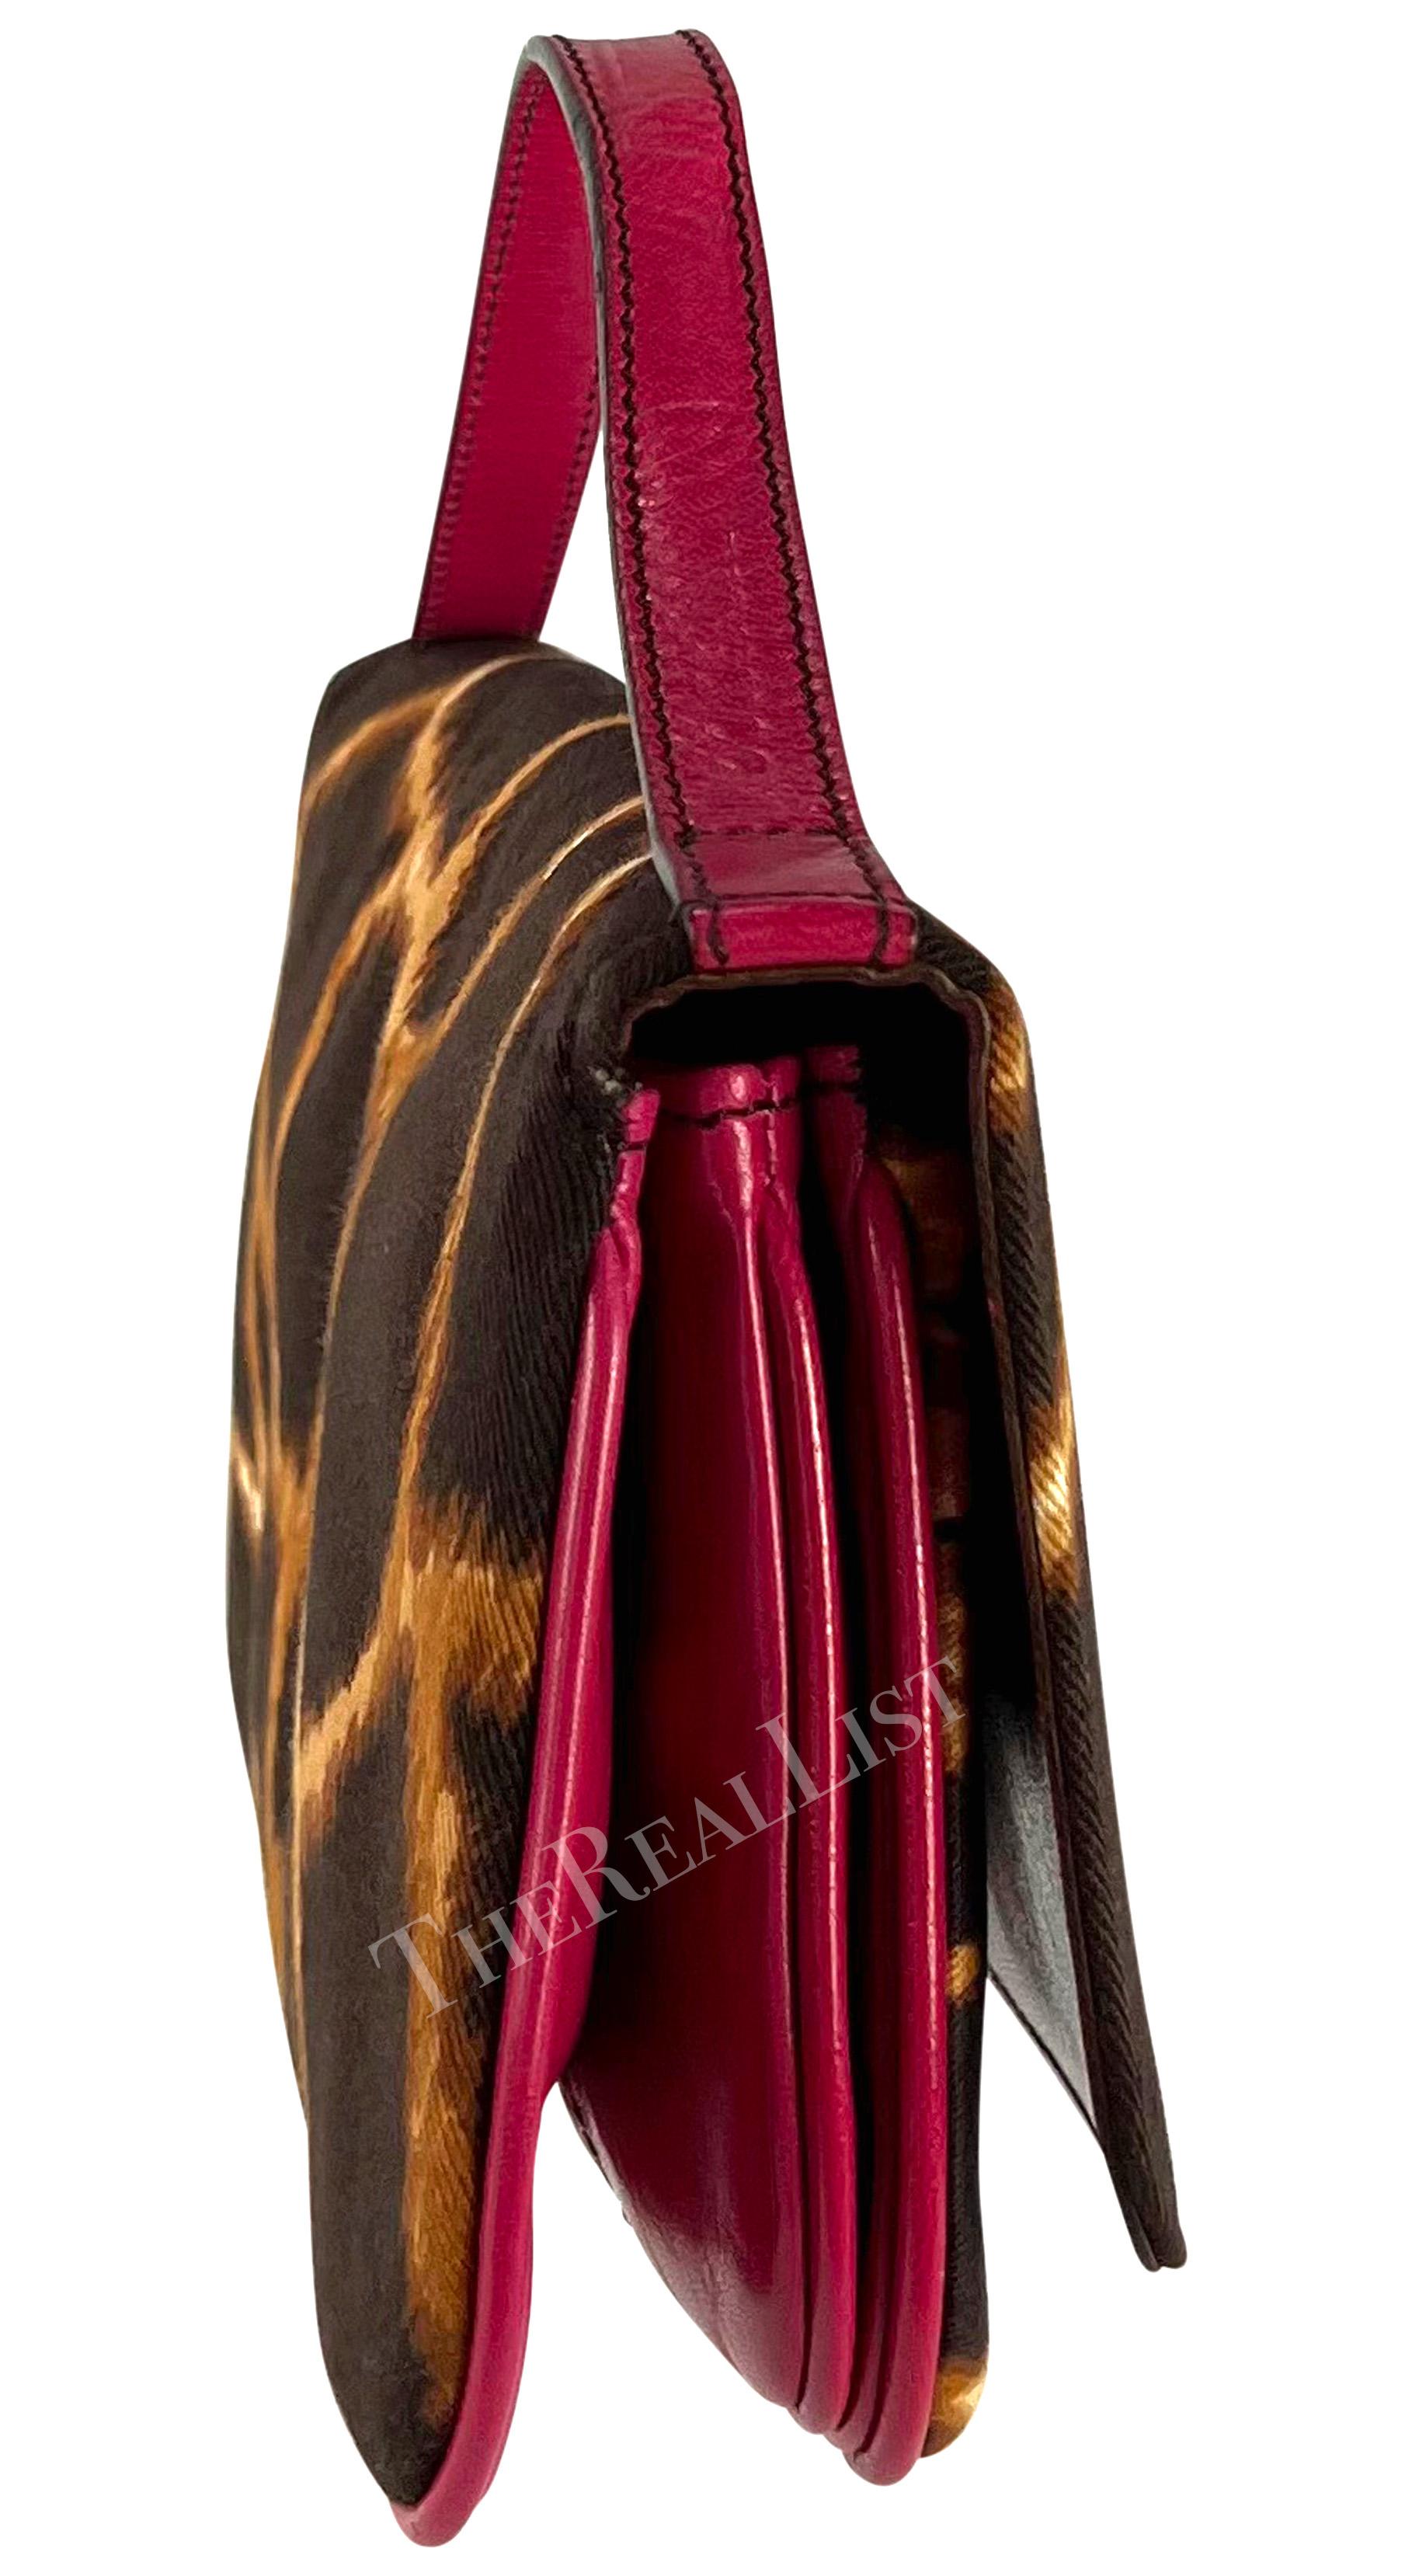 2000s Dolce & Gabbana Brown Animal Print Hot Pink Leather Top Strap Clutch Bag For Sale 3